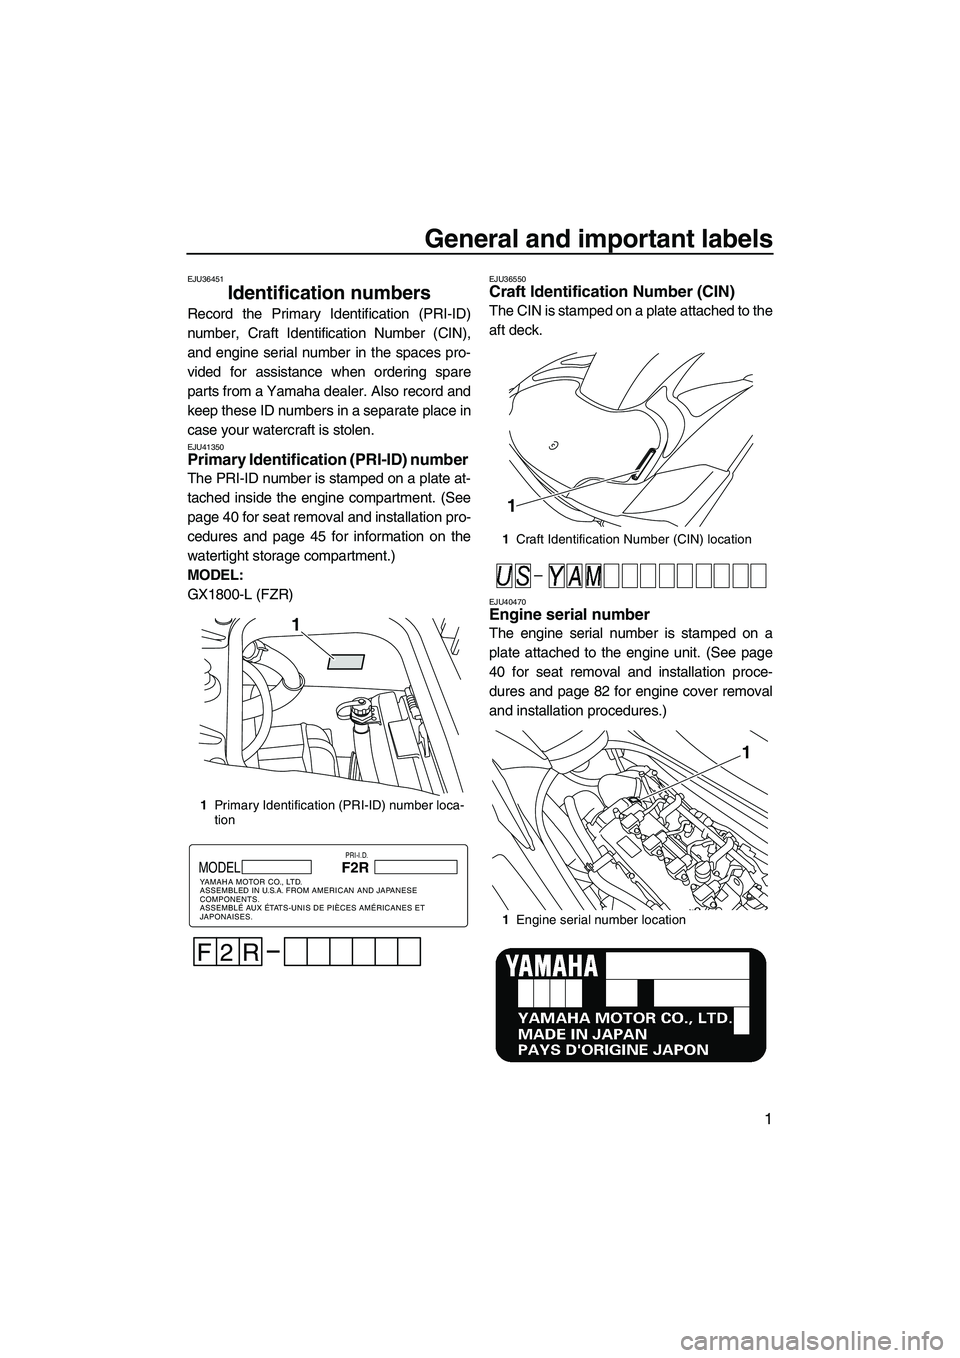 YAMAHA FZR 2012  Owners Manual General and important labels
1
EJU36451
Identification numbers 
Record the Primary Identification (PRI-ID)
number, Craft Identification Number (CIN),
and engine serial number in the spaces pro-
vided 